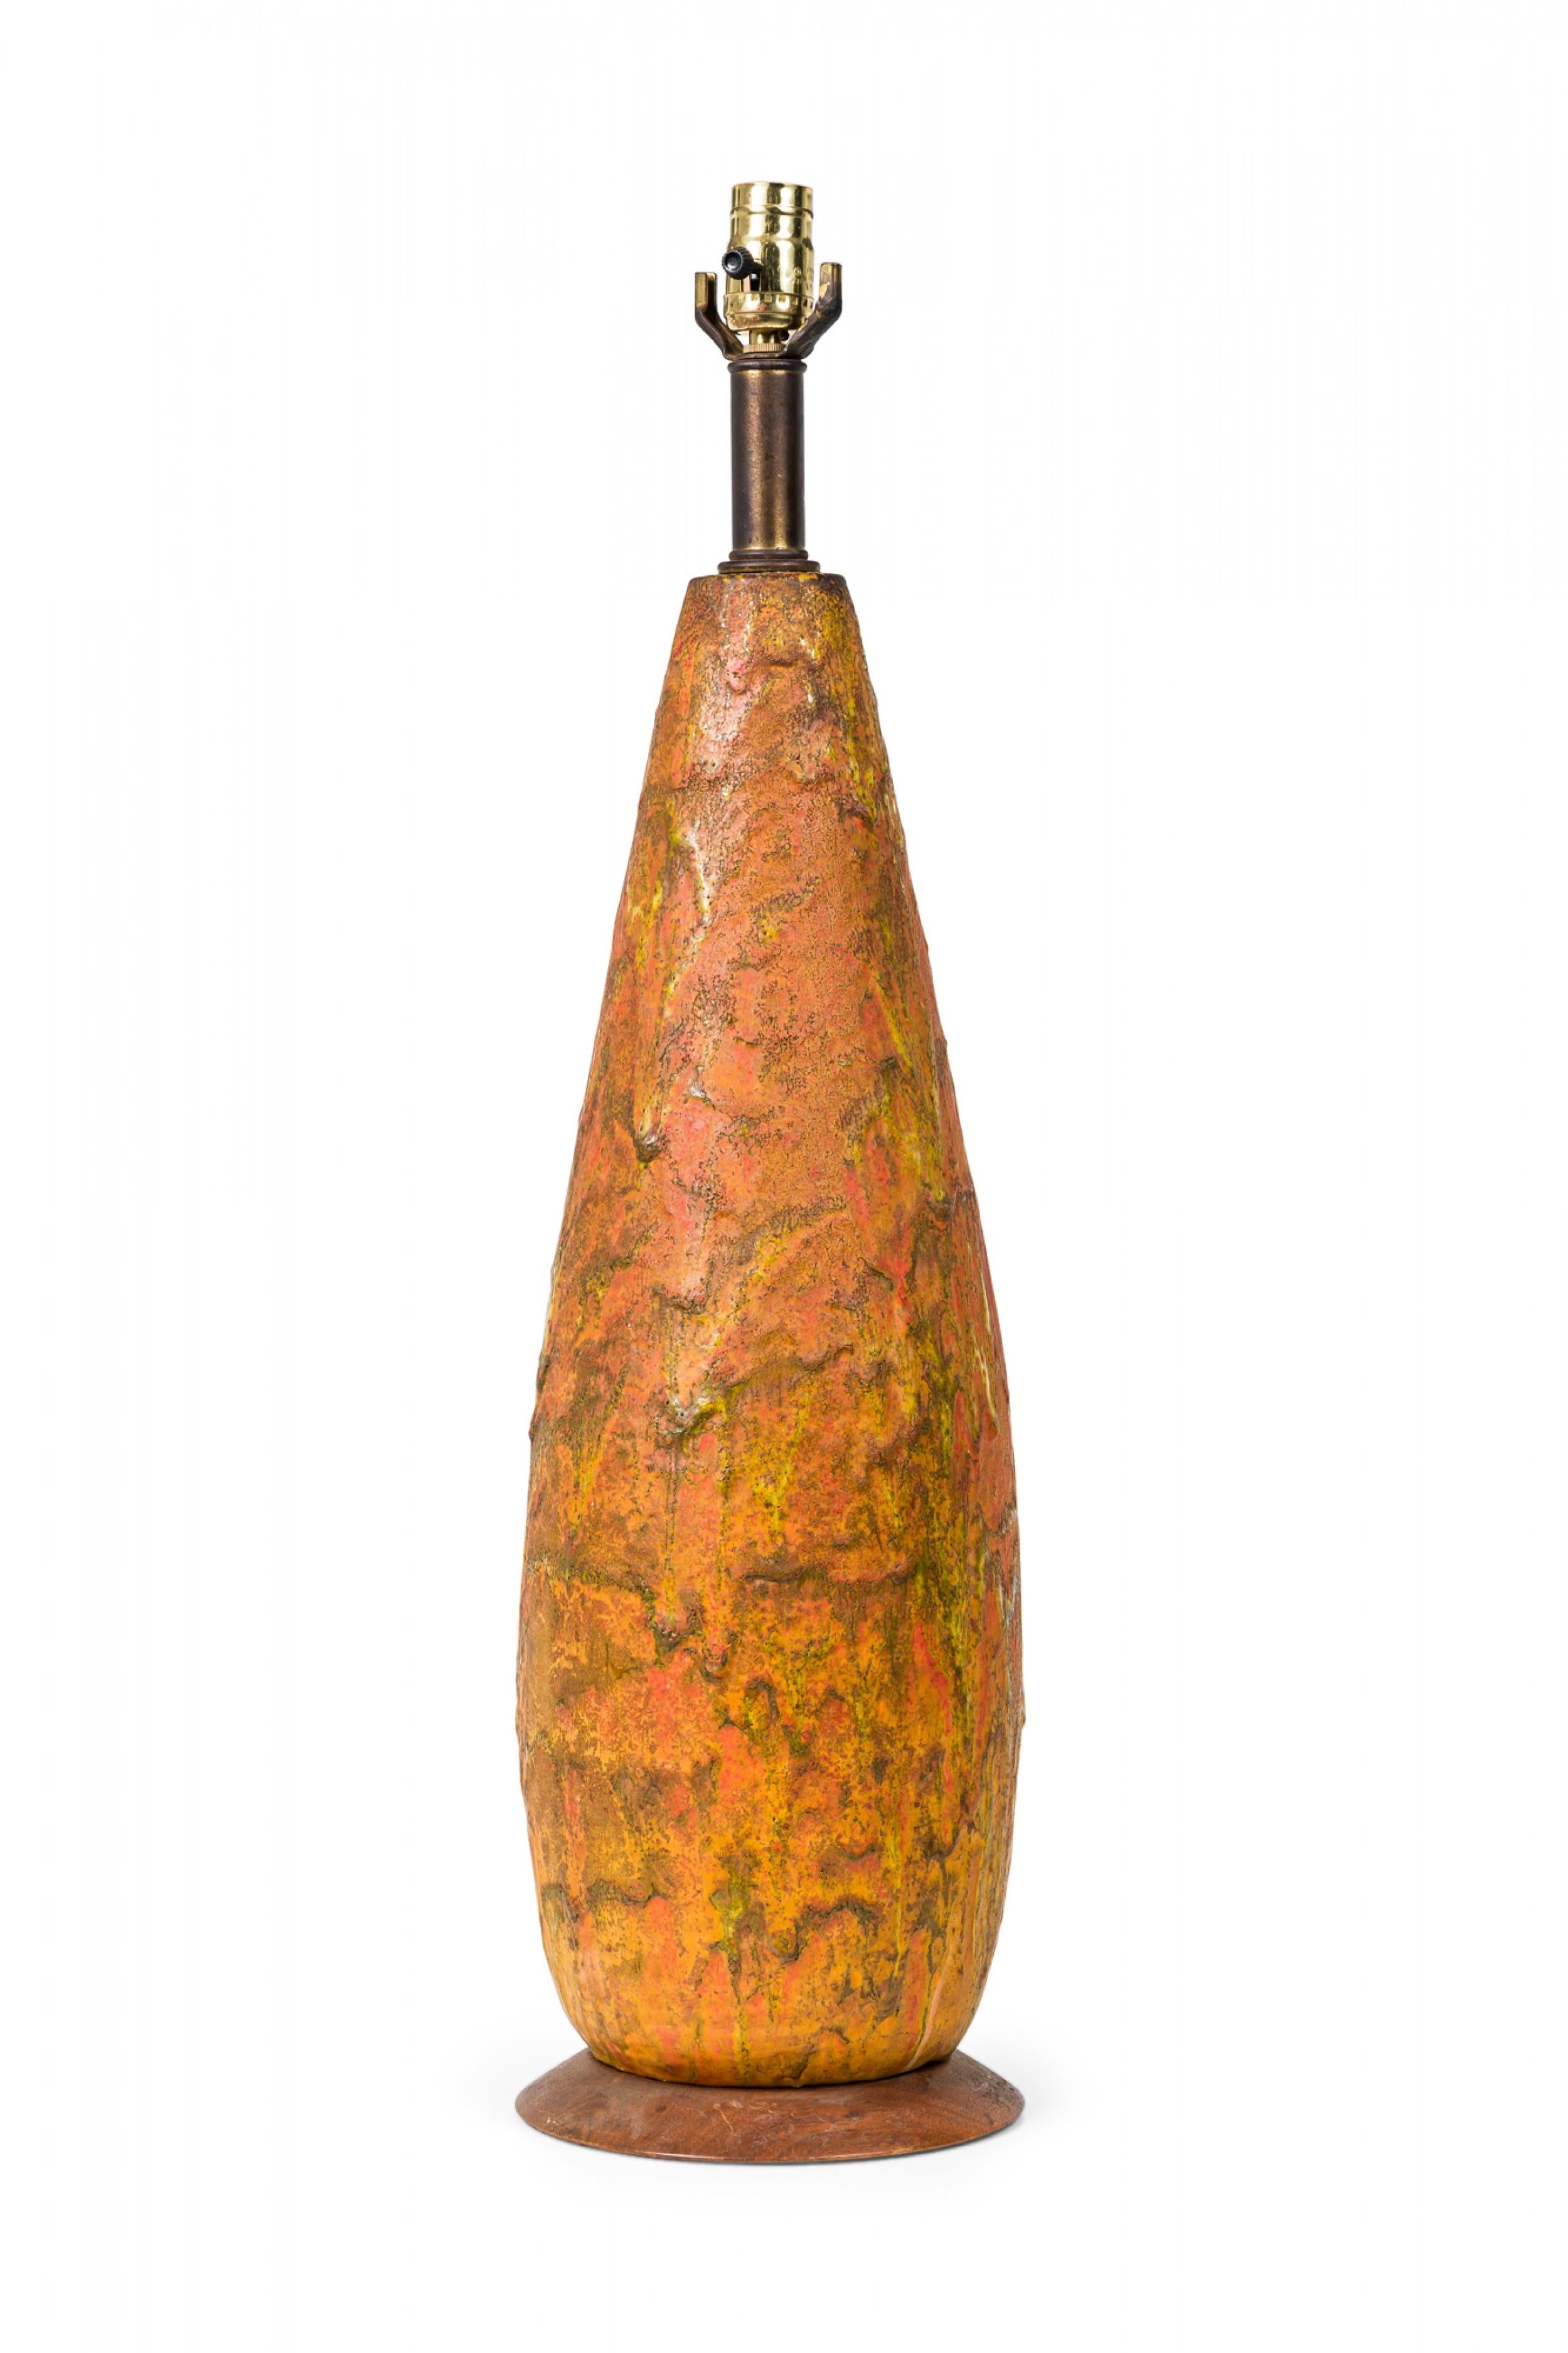 Mid-Century American ceramic cone form table lamp tapered toward the top, housing a brass stem with functioning light switch socket, the body bathed in a thick fat lava-style drip glaze over glaze in fiery orange and red gradations, mounted on a